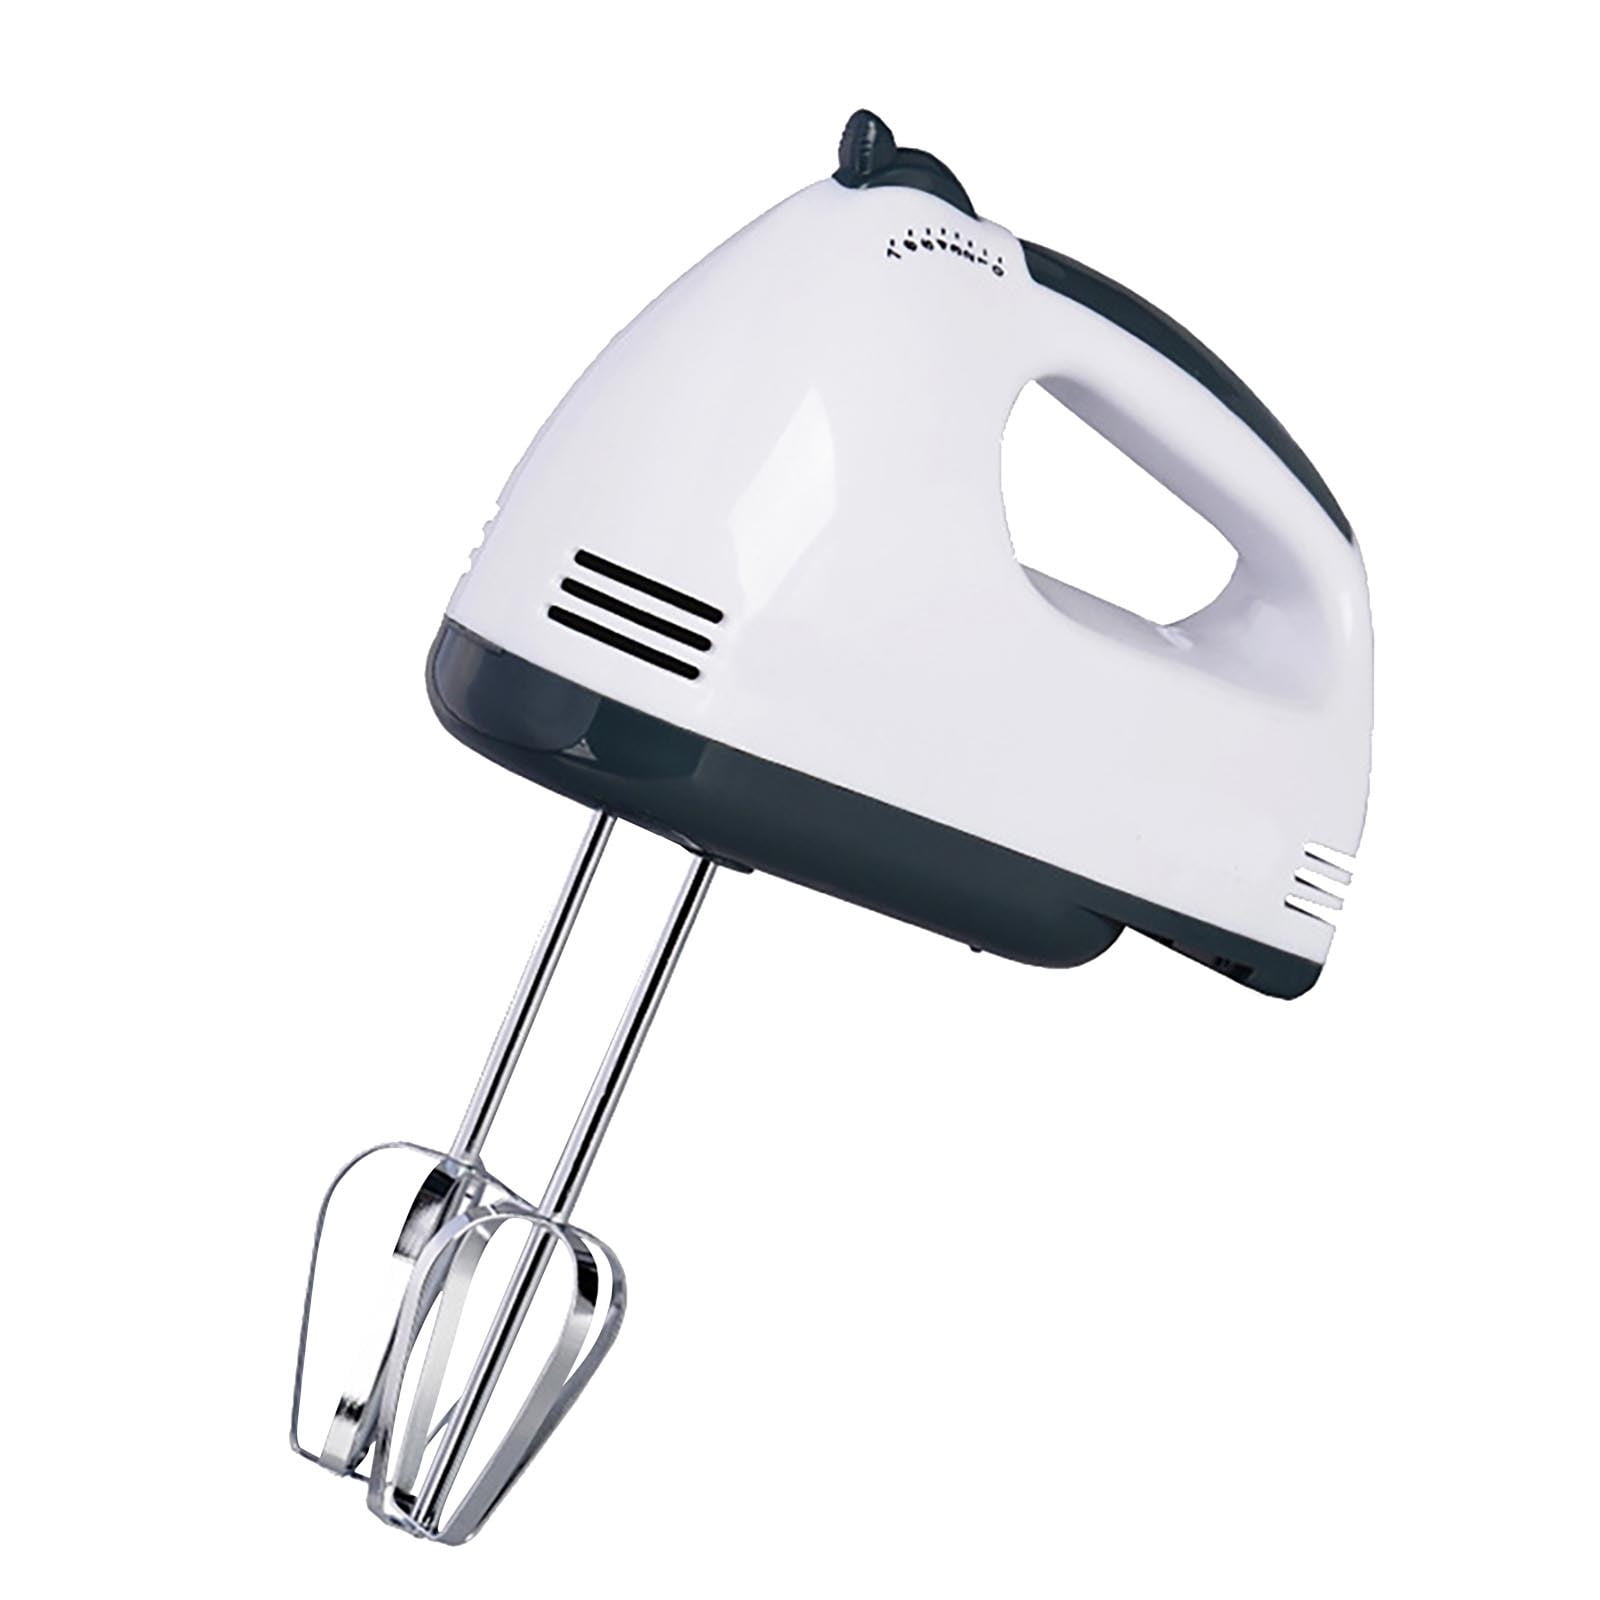 Electric Cream Whipper, Electric Hand Mixer 3 Gears Simple Operation Long  Standby for Cooking